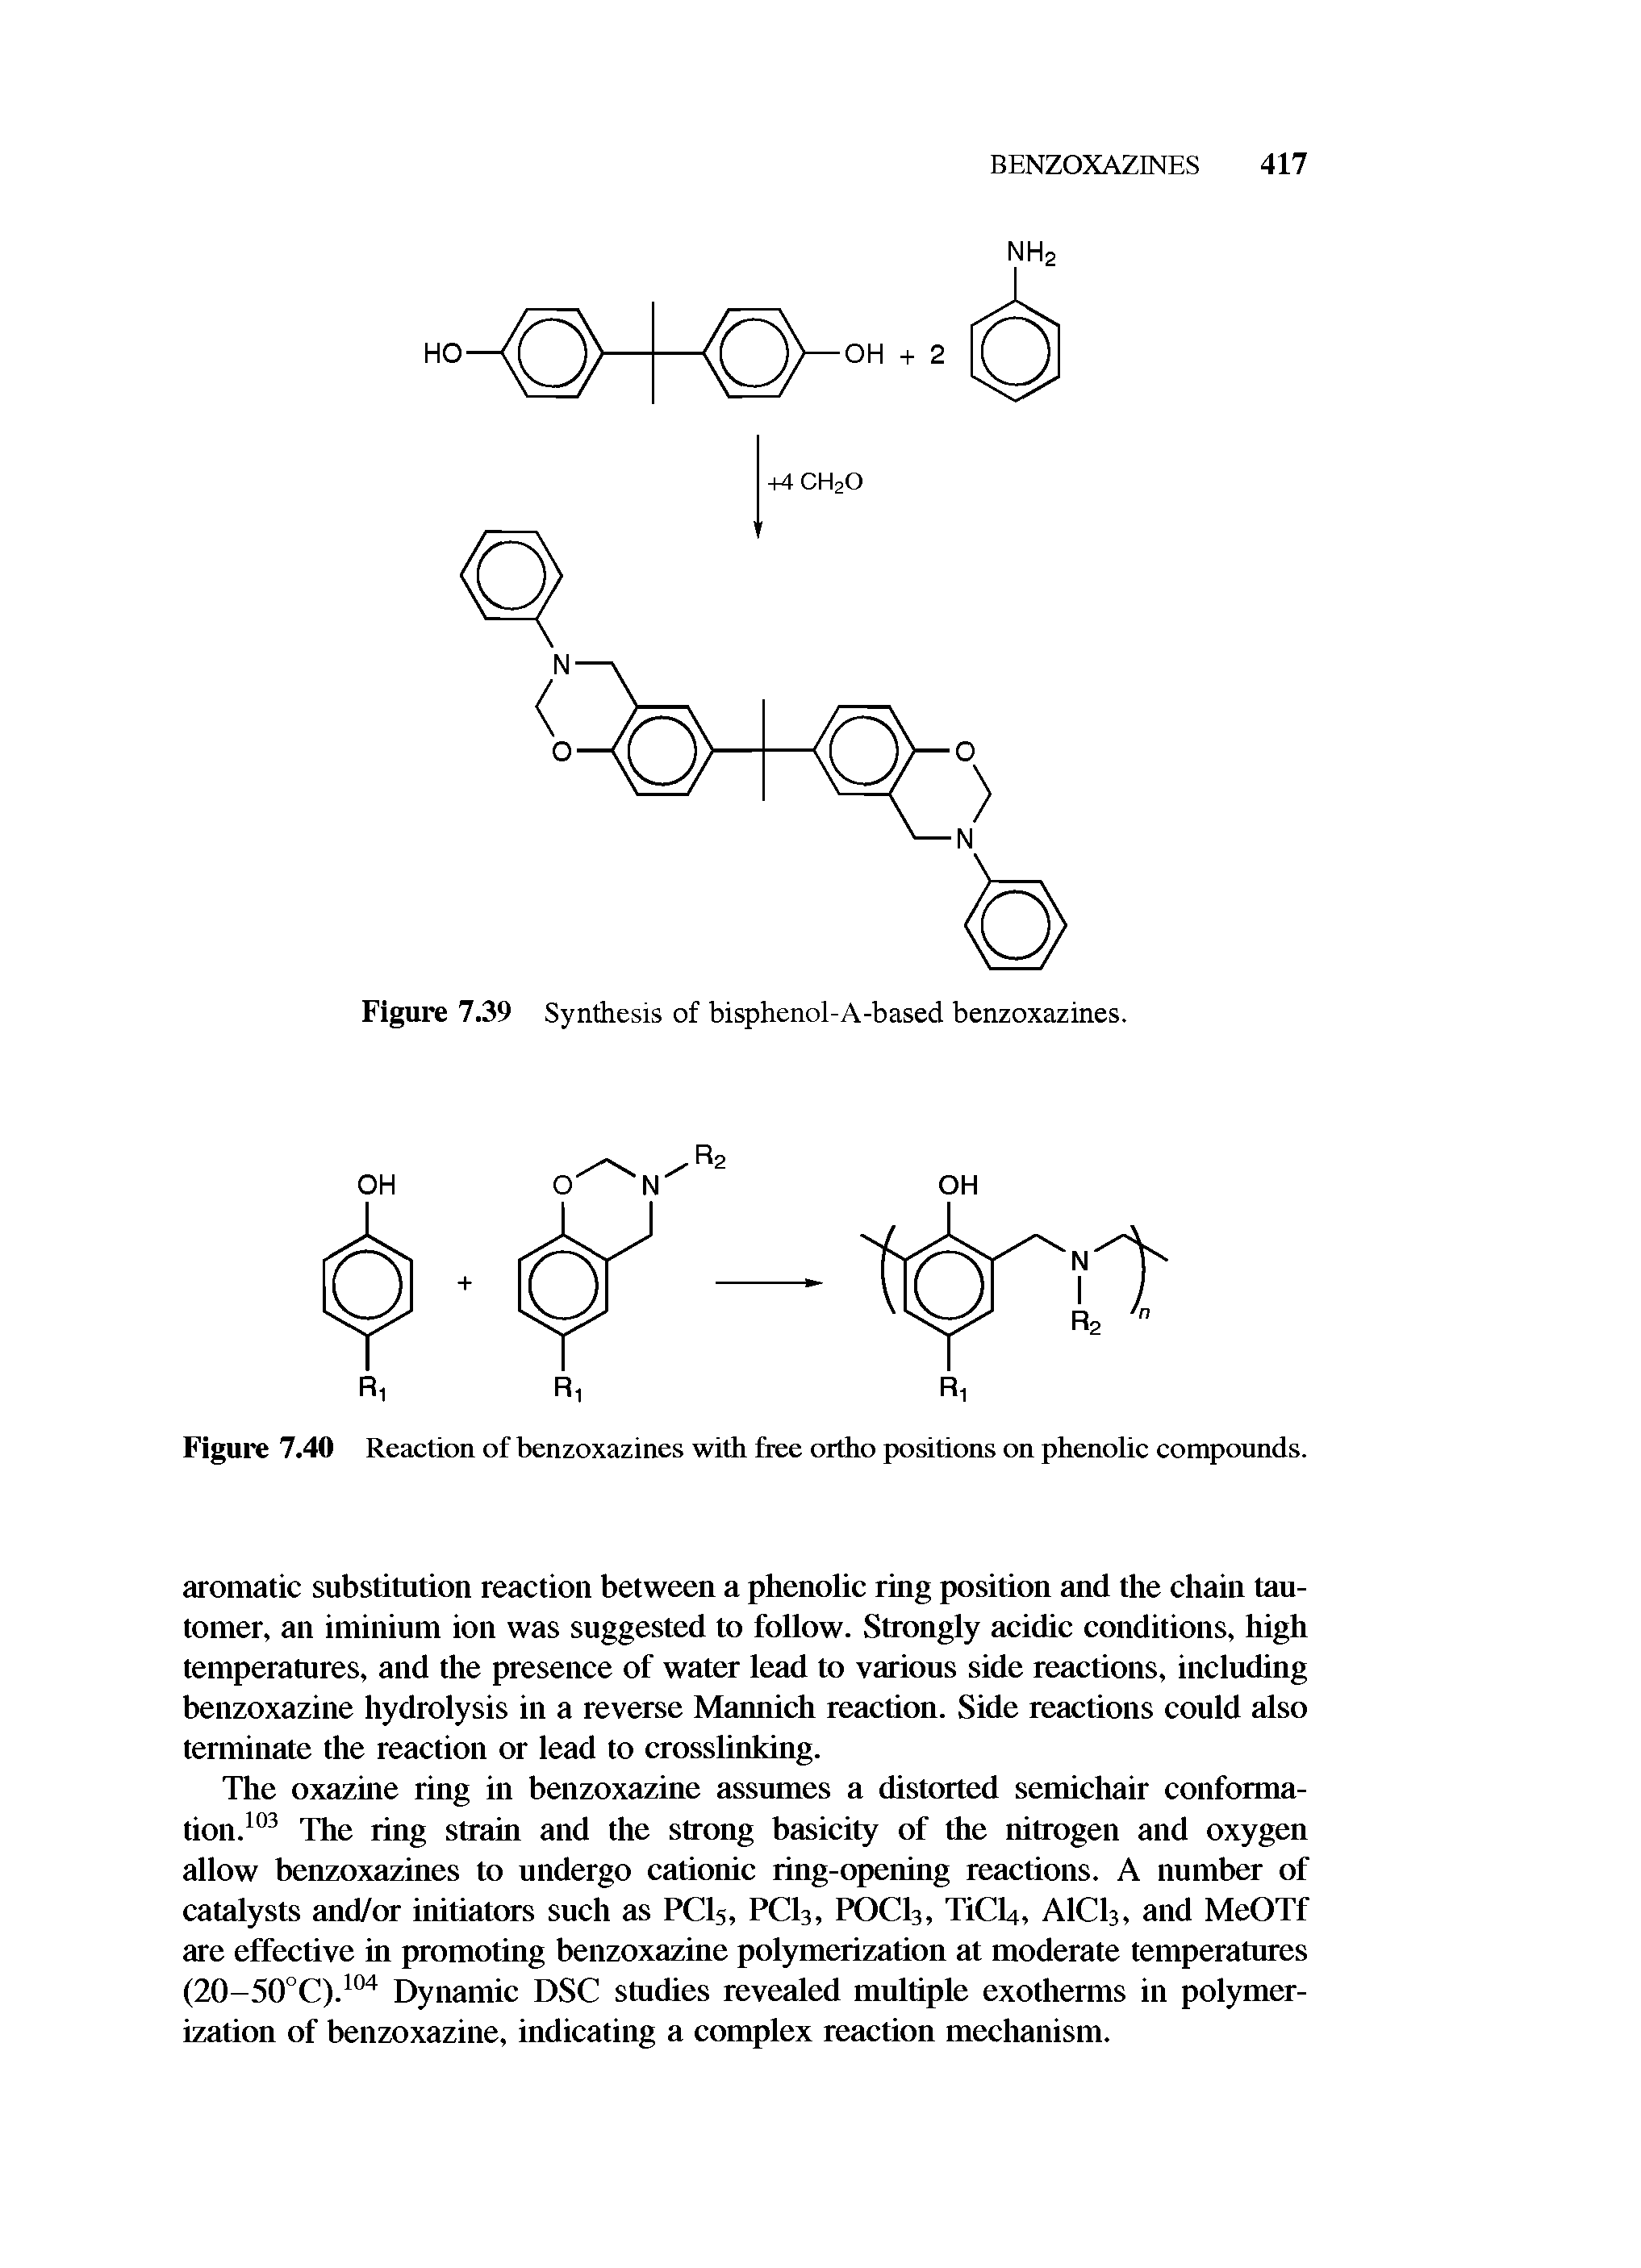 Figure 7.40 Reaction of benzoxazines with free ortho positions on phenolic compounds.